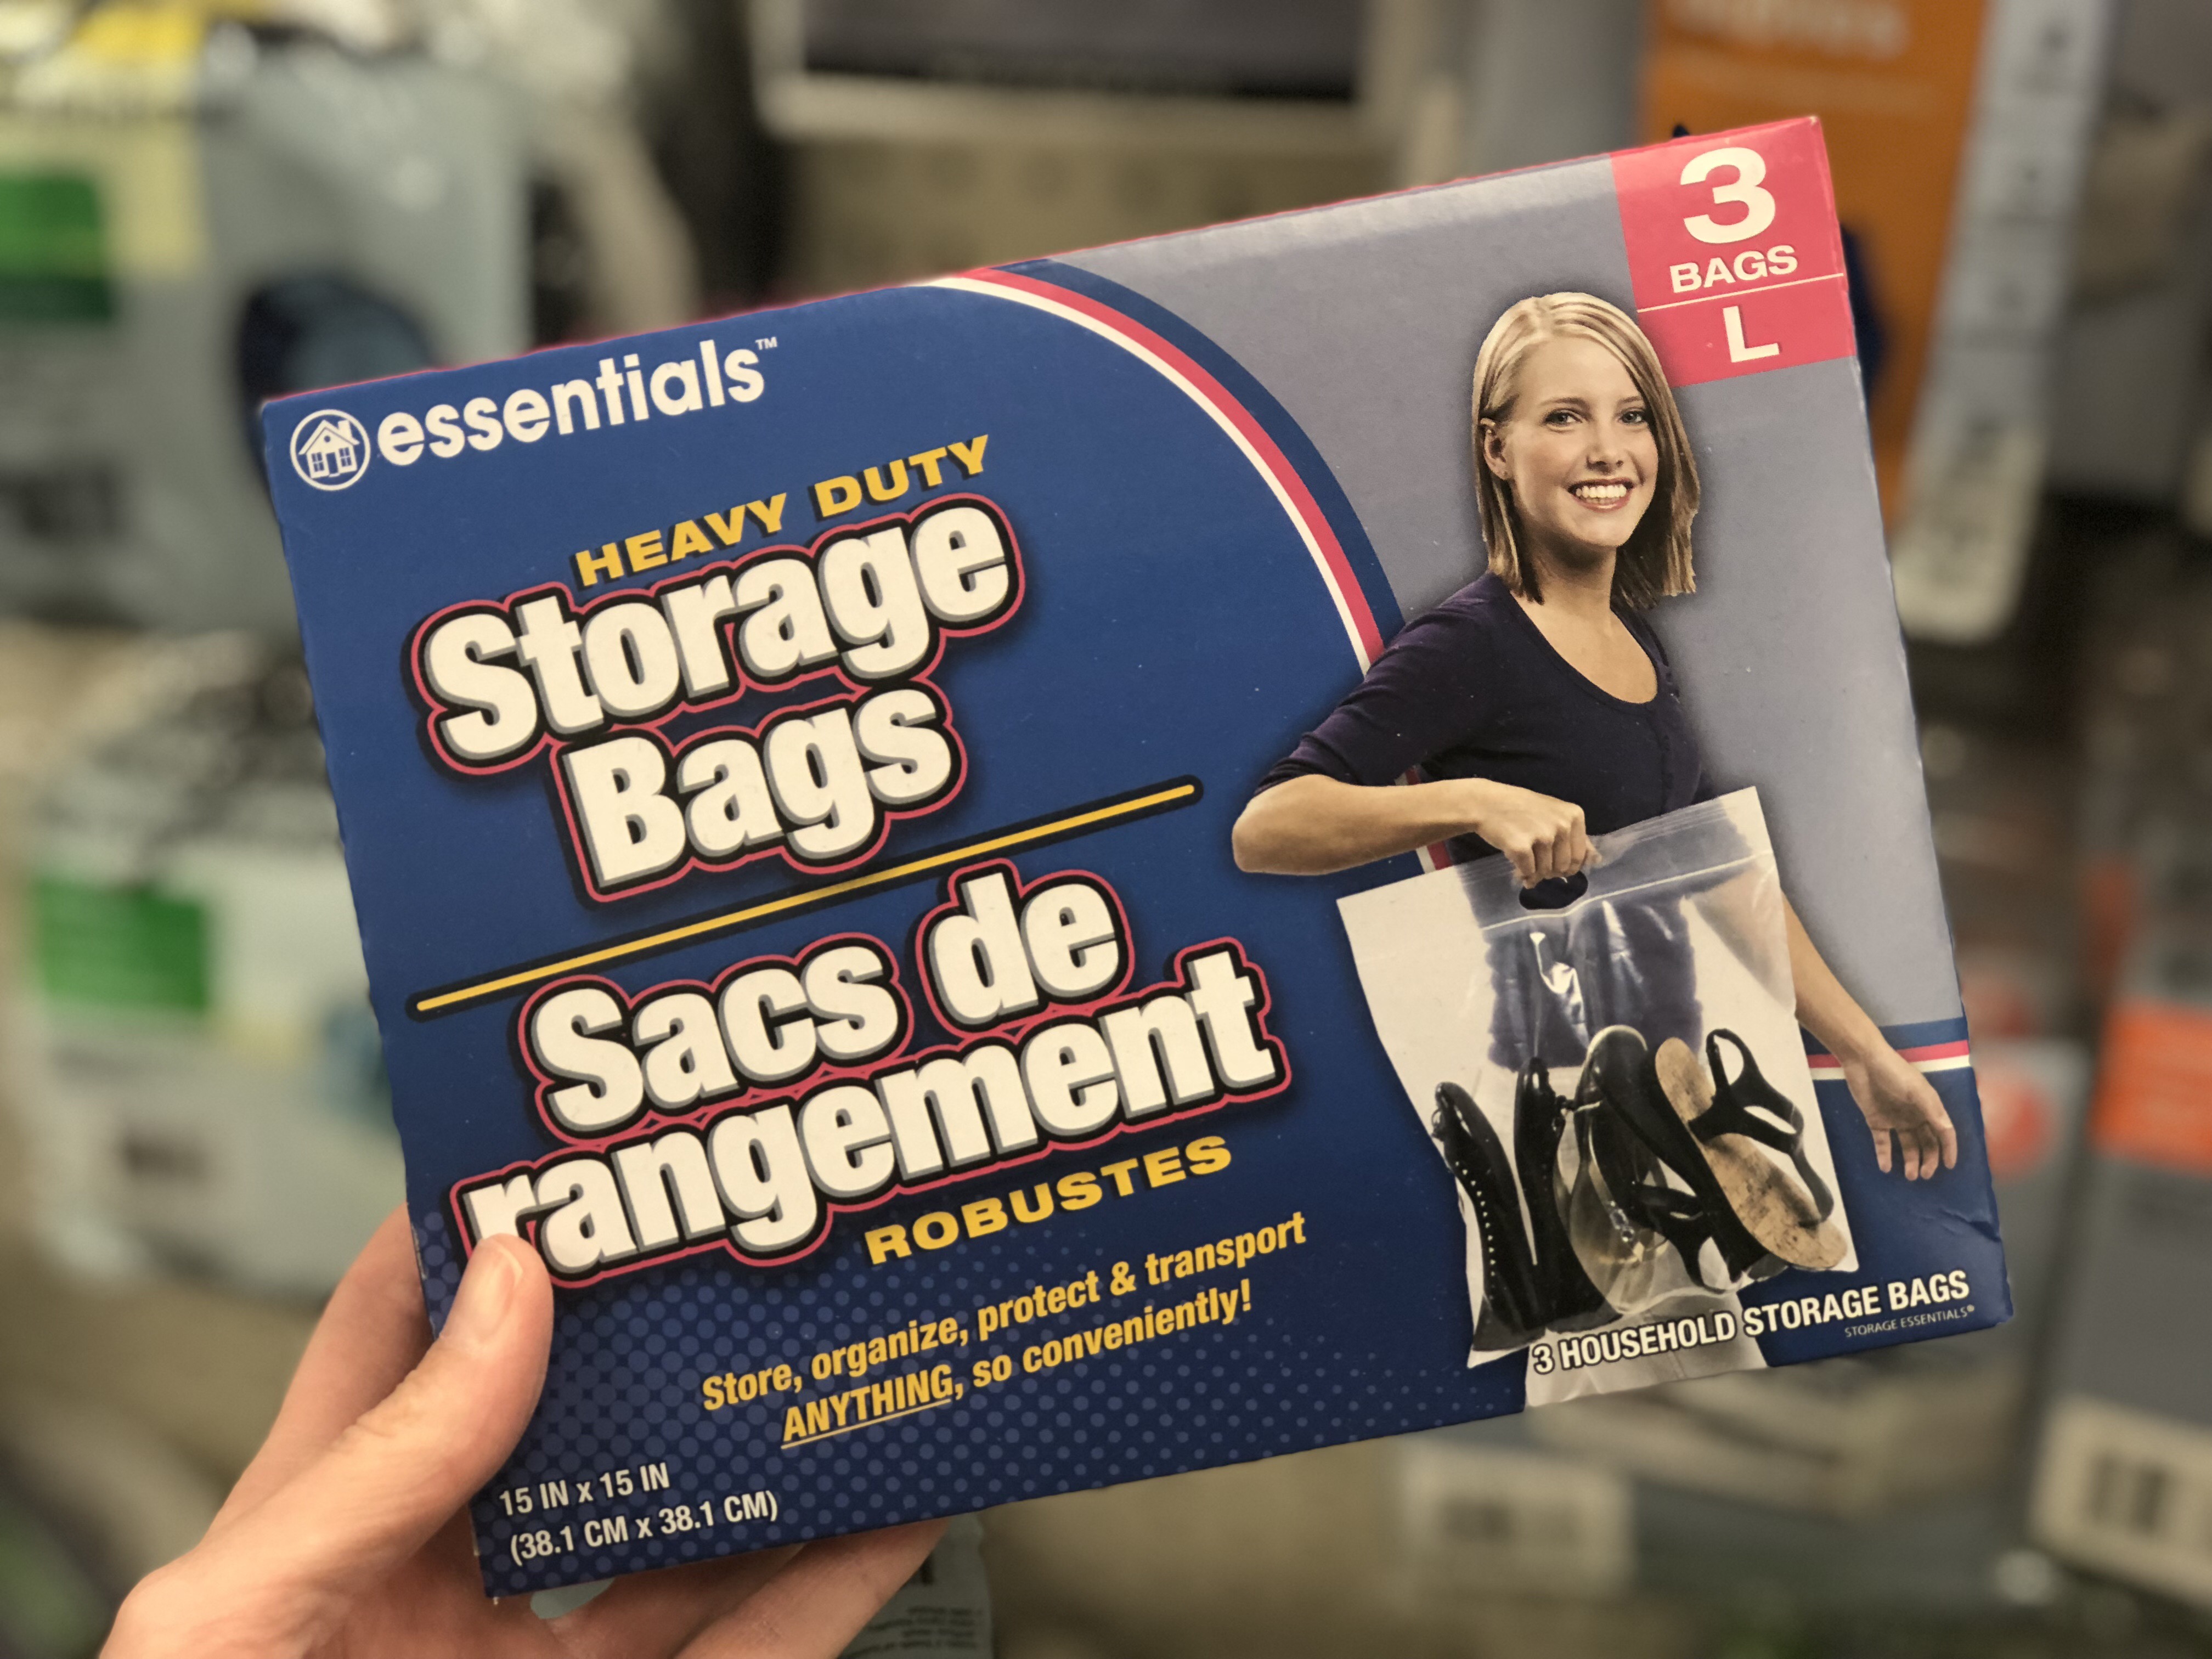 https://hip2save.com/wp-content/uploads/2018/03/essentials-heavy-duty-large-storage-bags-dollar-tree-2.jpg?resize=4032%2C3024&strip=all